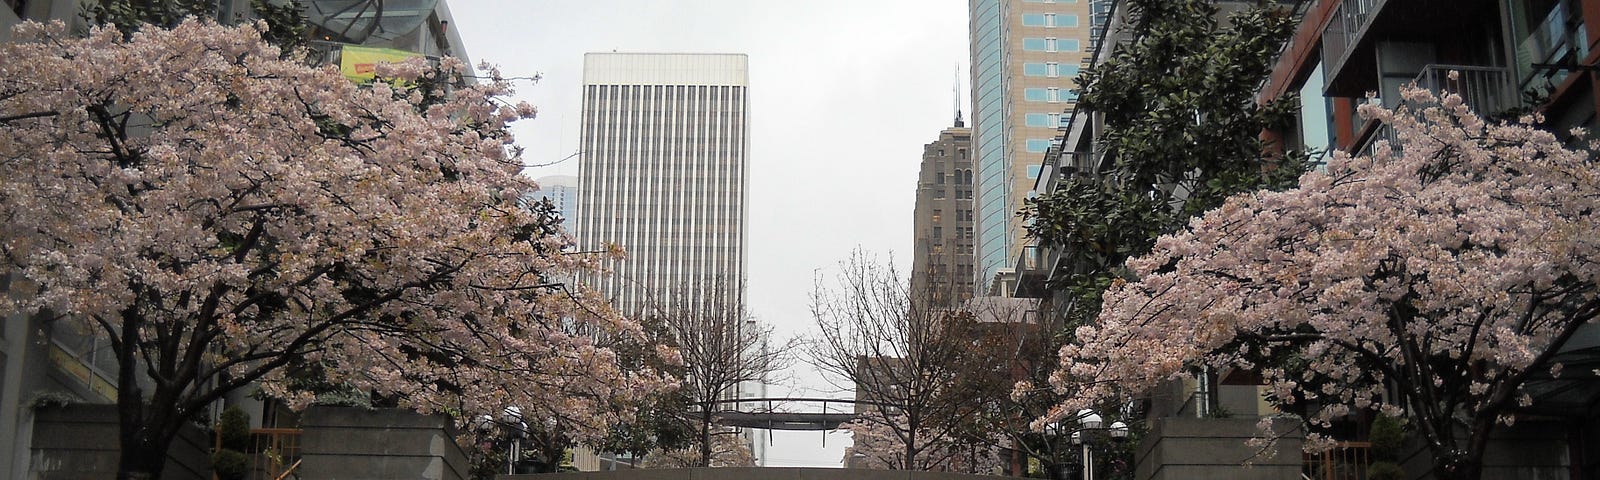 A photo of blossoming Japanese cherry trees lining both sides of a promenade that reaches towards the city skyline.